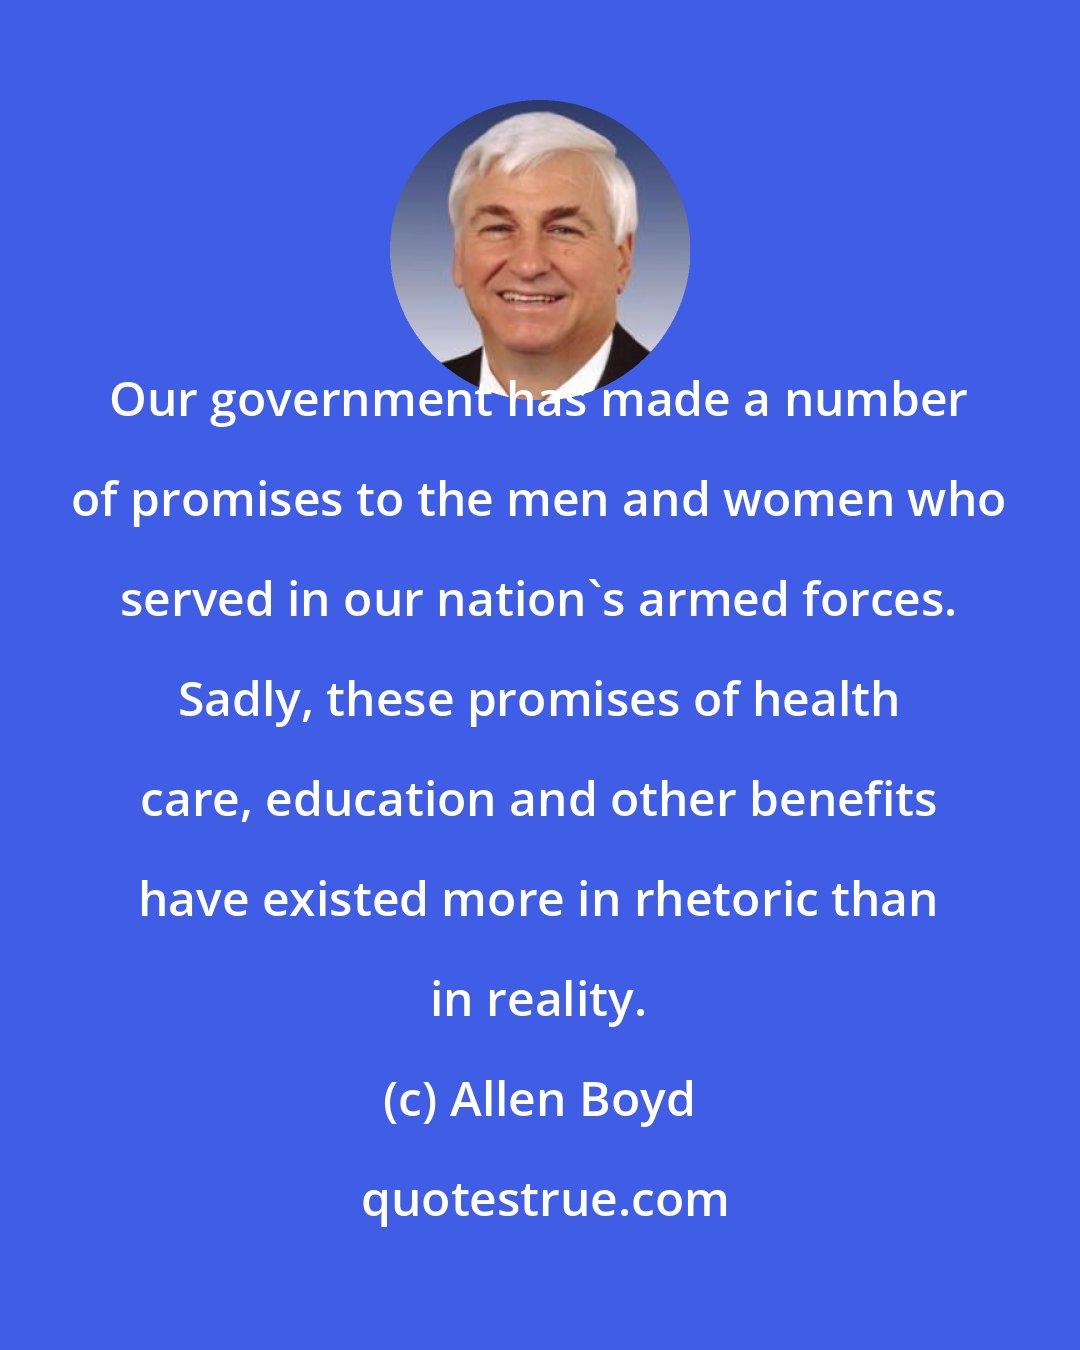 Allen Boyd: Our government has made a number of promises to the men and women who served in our nation's armed forces. Sadly, these promises of health care, education and other benefits have existed more in rhetoric than in reality.